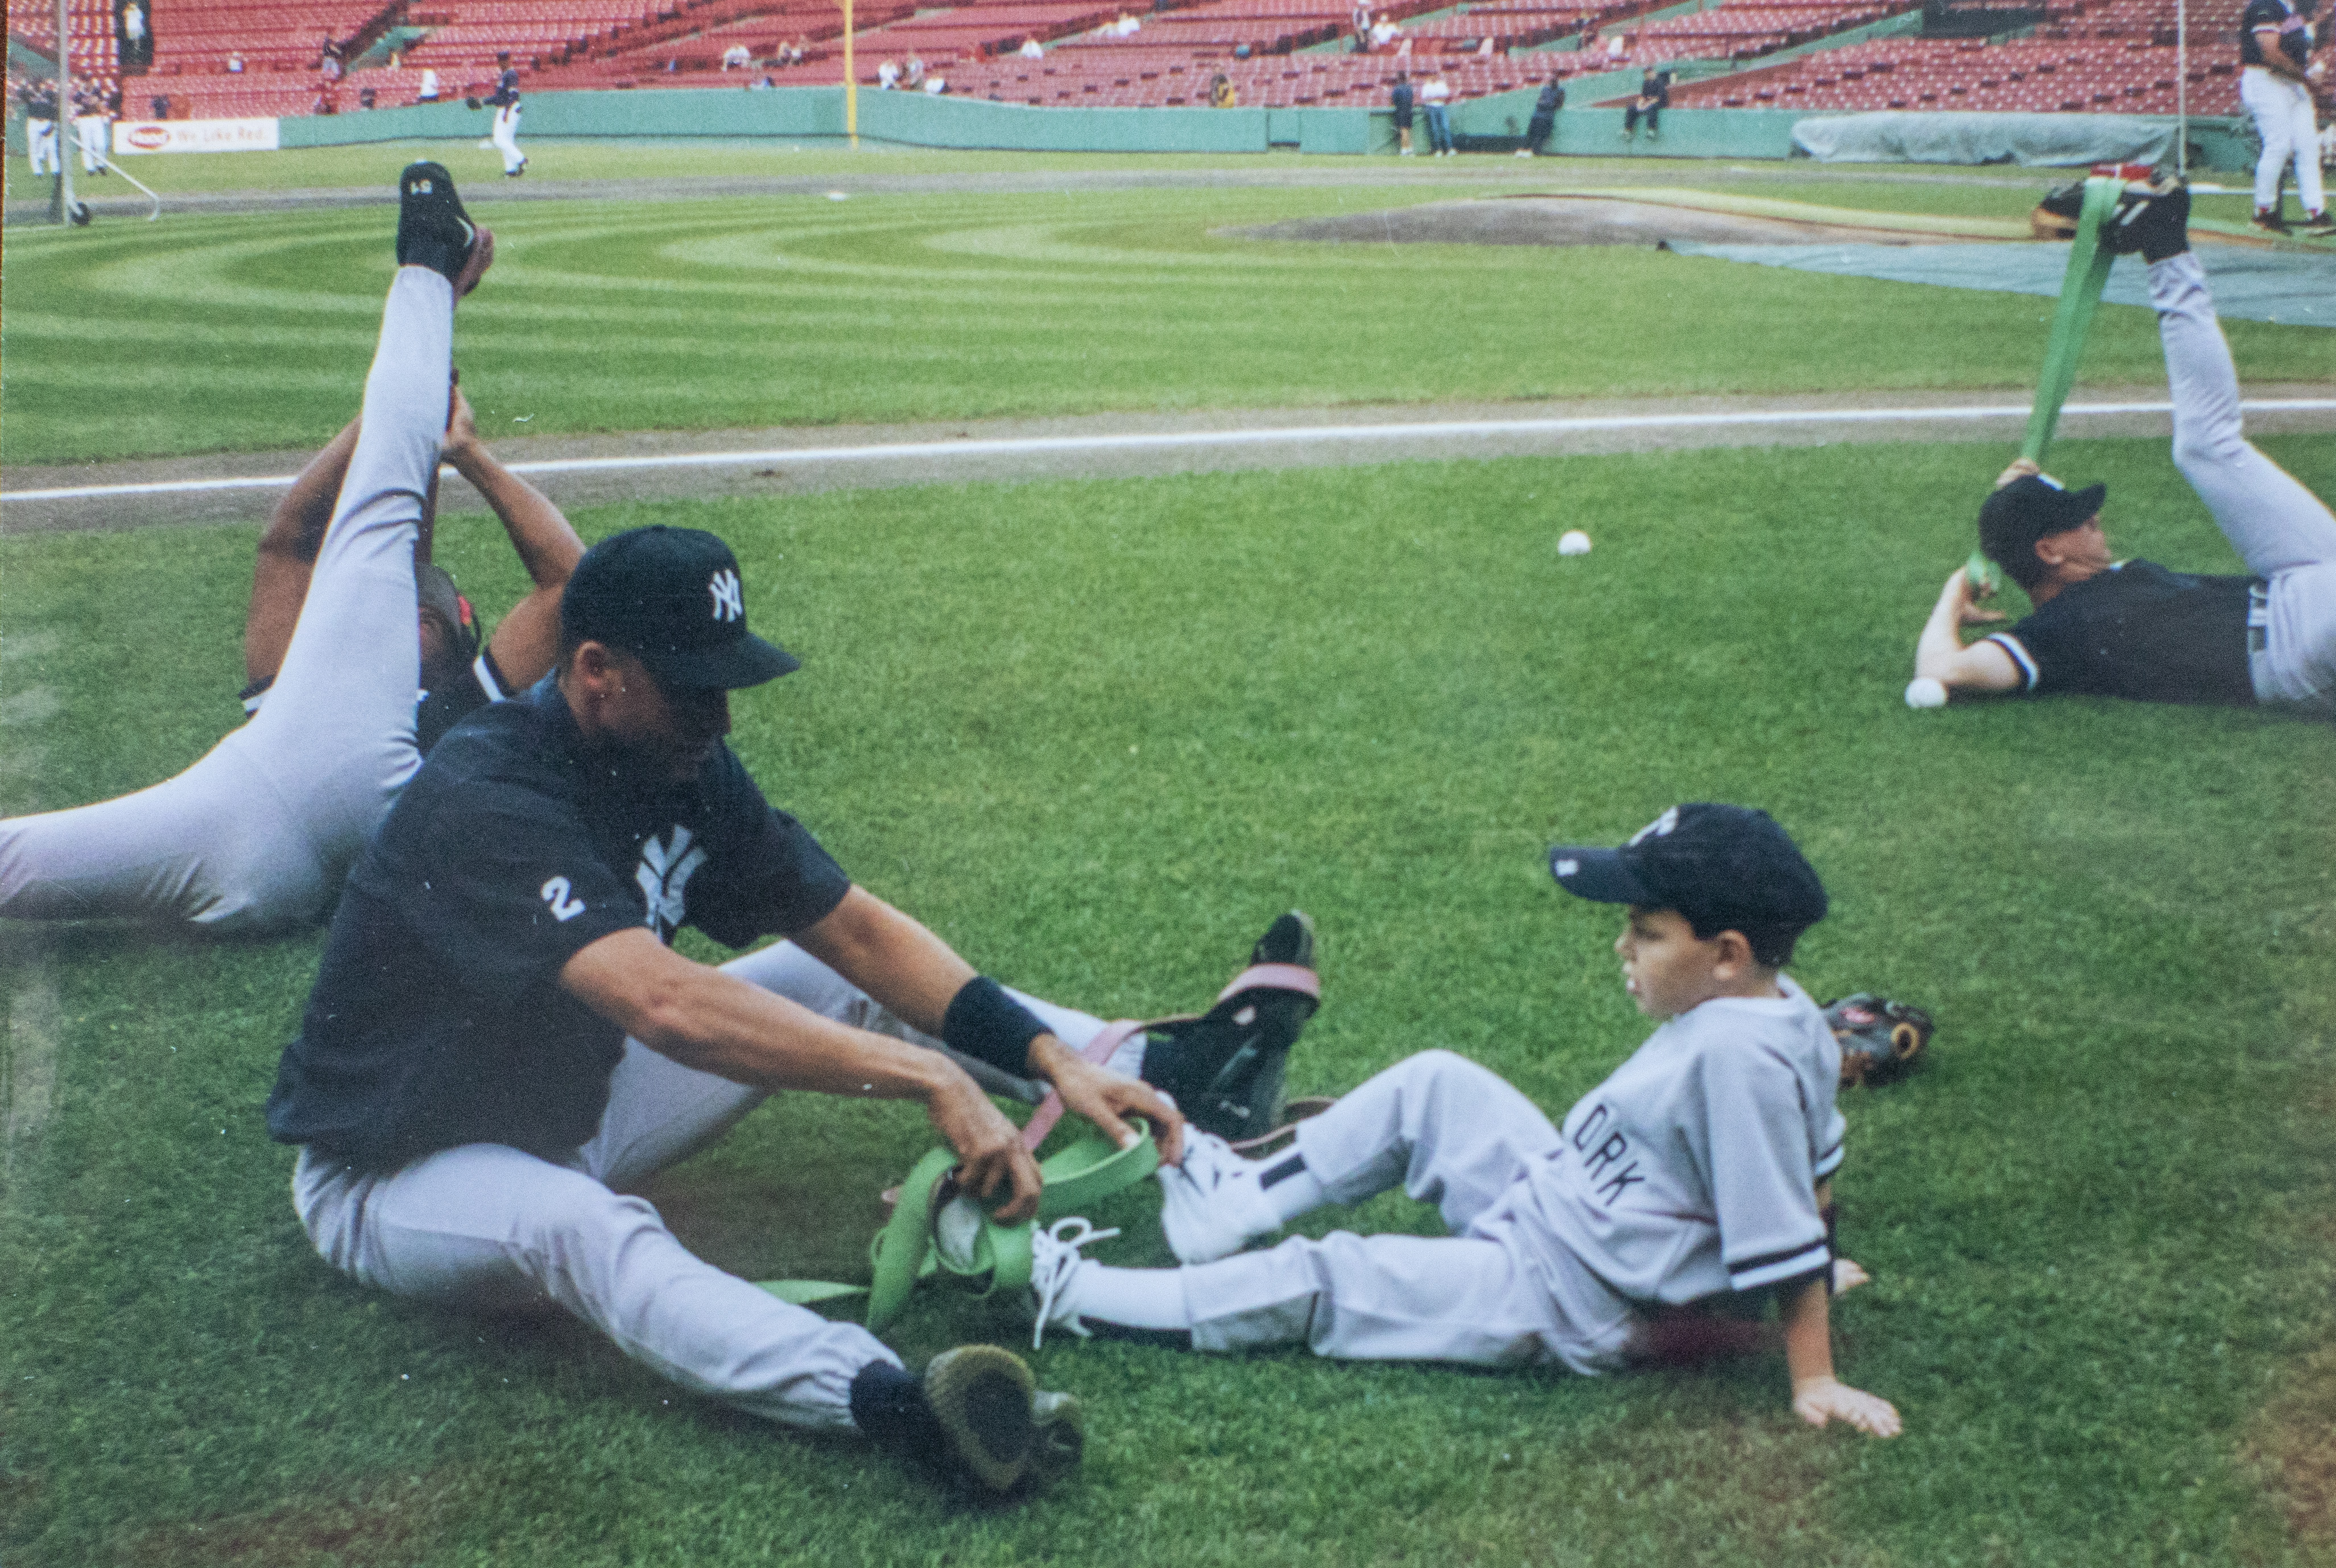 Yankees legend Derek Jeter 'was like a brother' to N.J. boy with cancer  long before Hall of Fame honor 